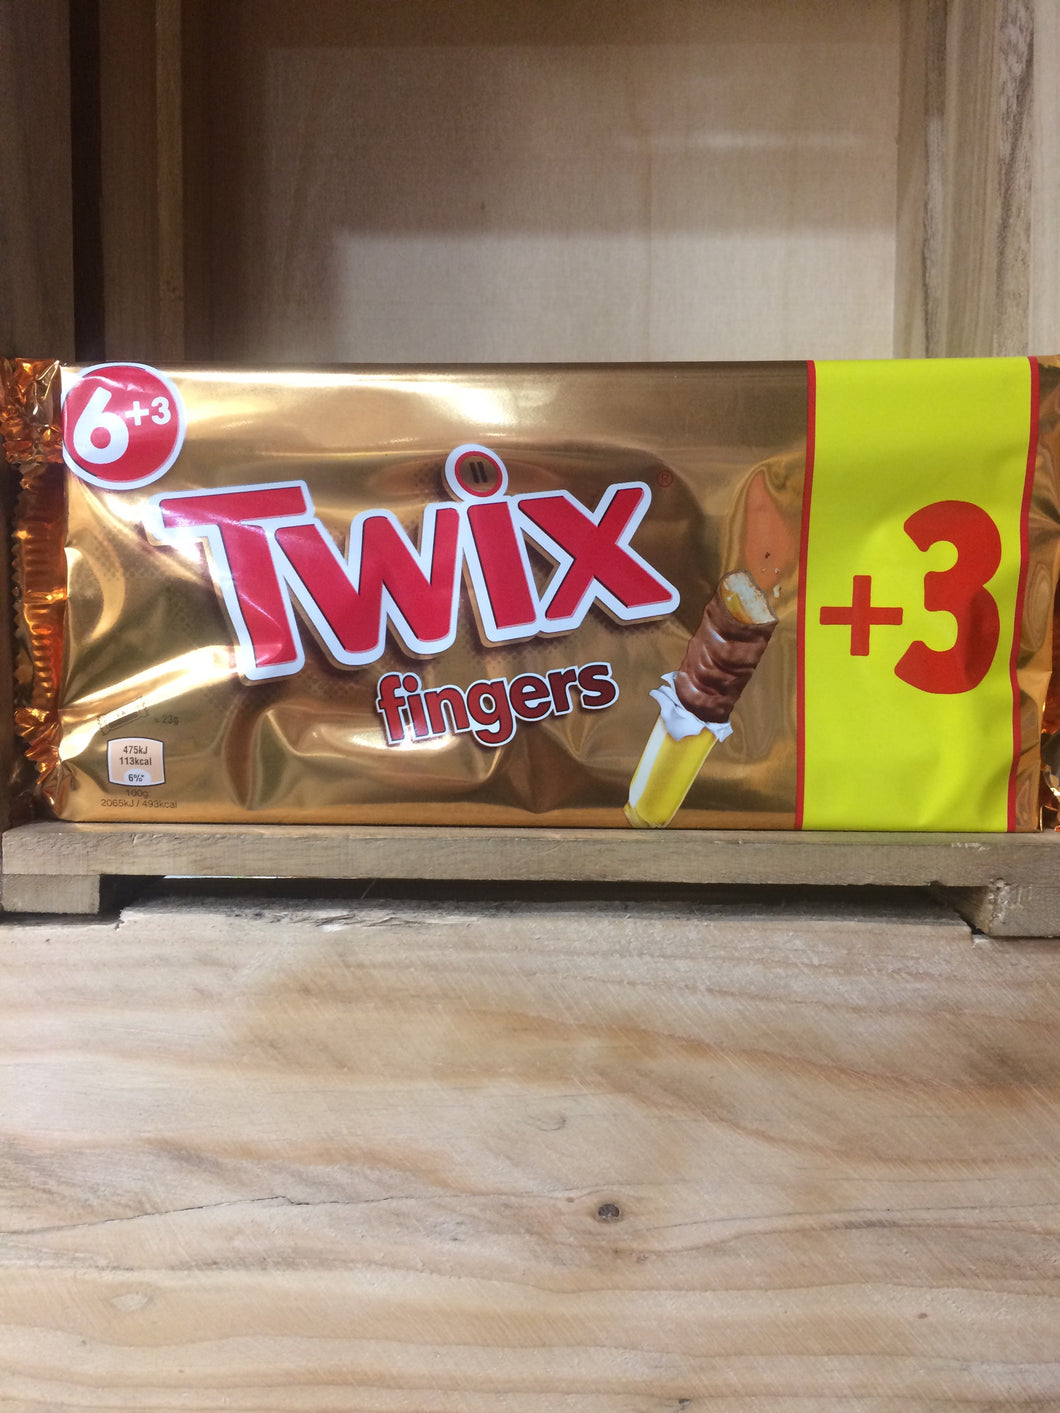 Twix Fingers 6+3 Extra Pack 207g